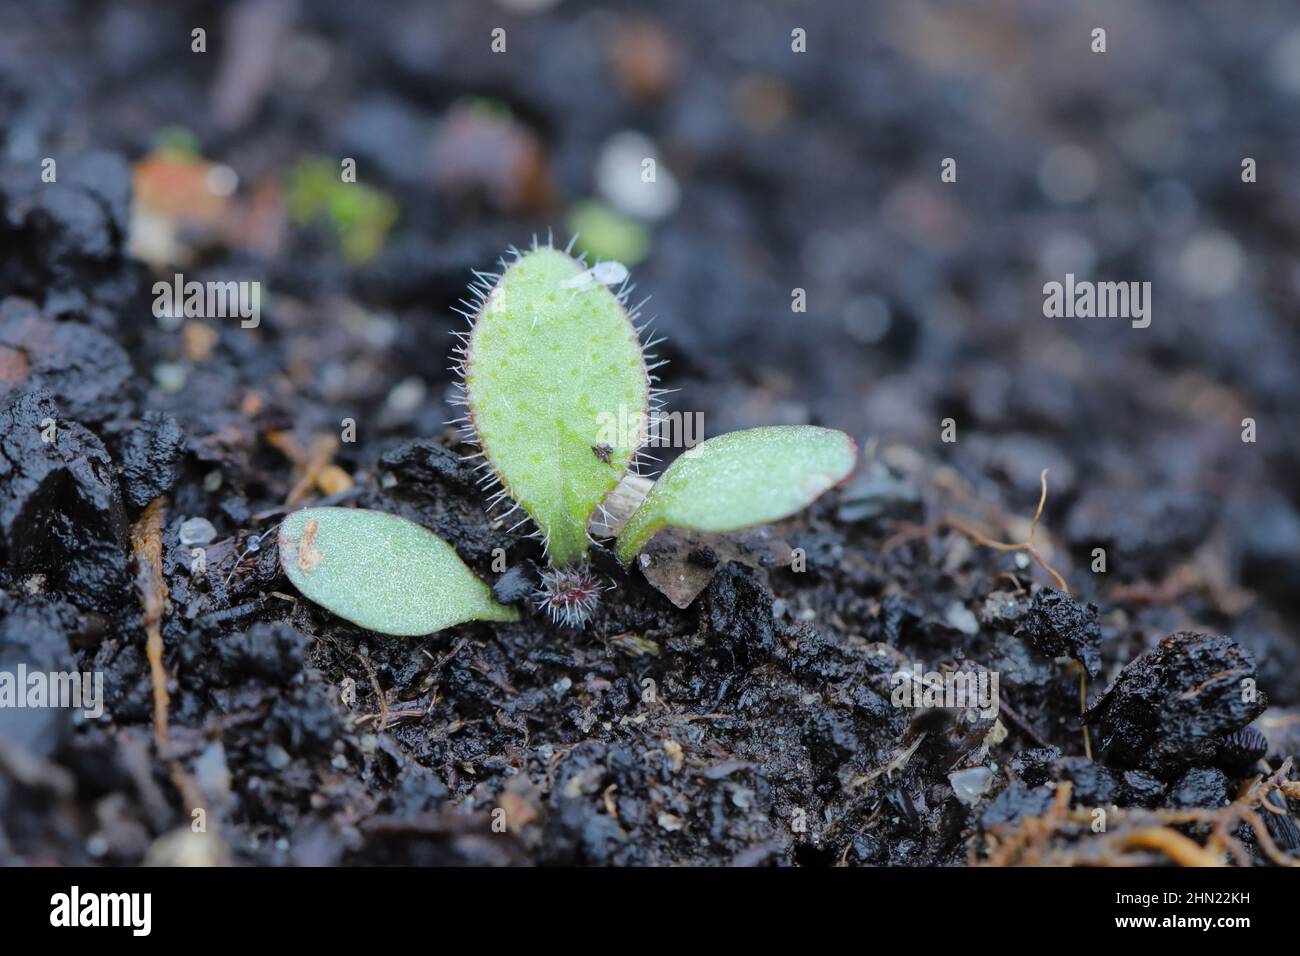 Widespread and common weed in agricultural and horticultural crops. Stock Photo